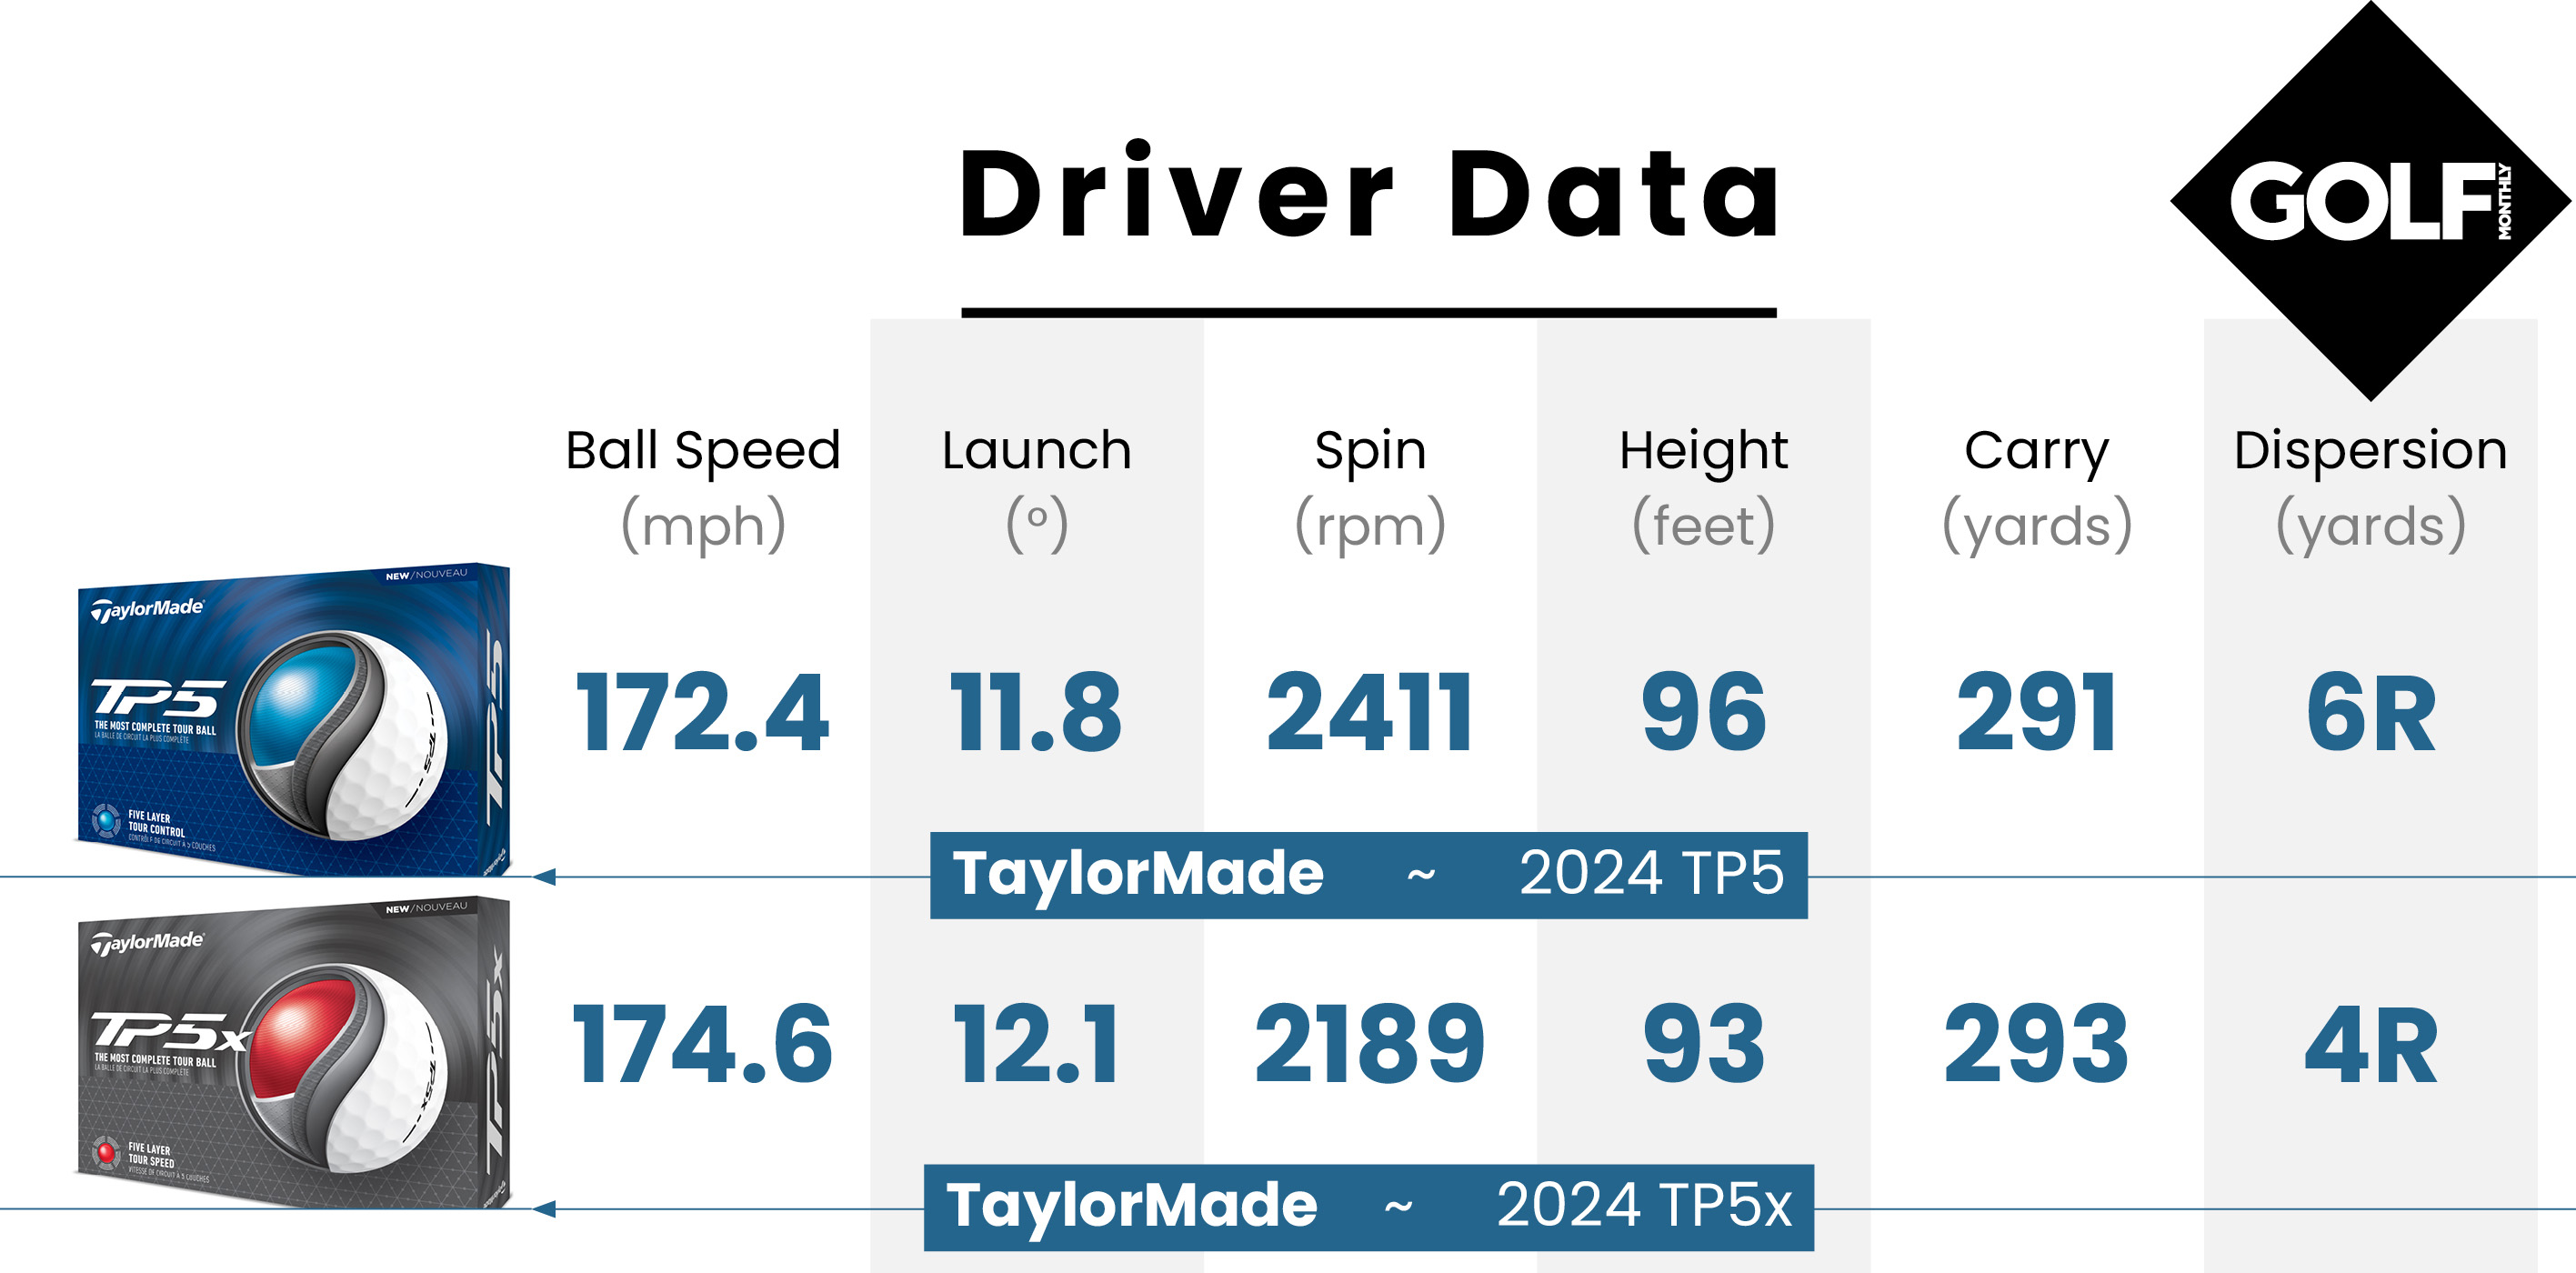 Driver data from the TaylorMade 2024 TP5x Golf Ball